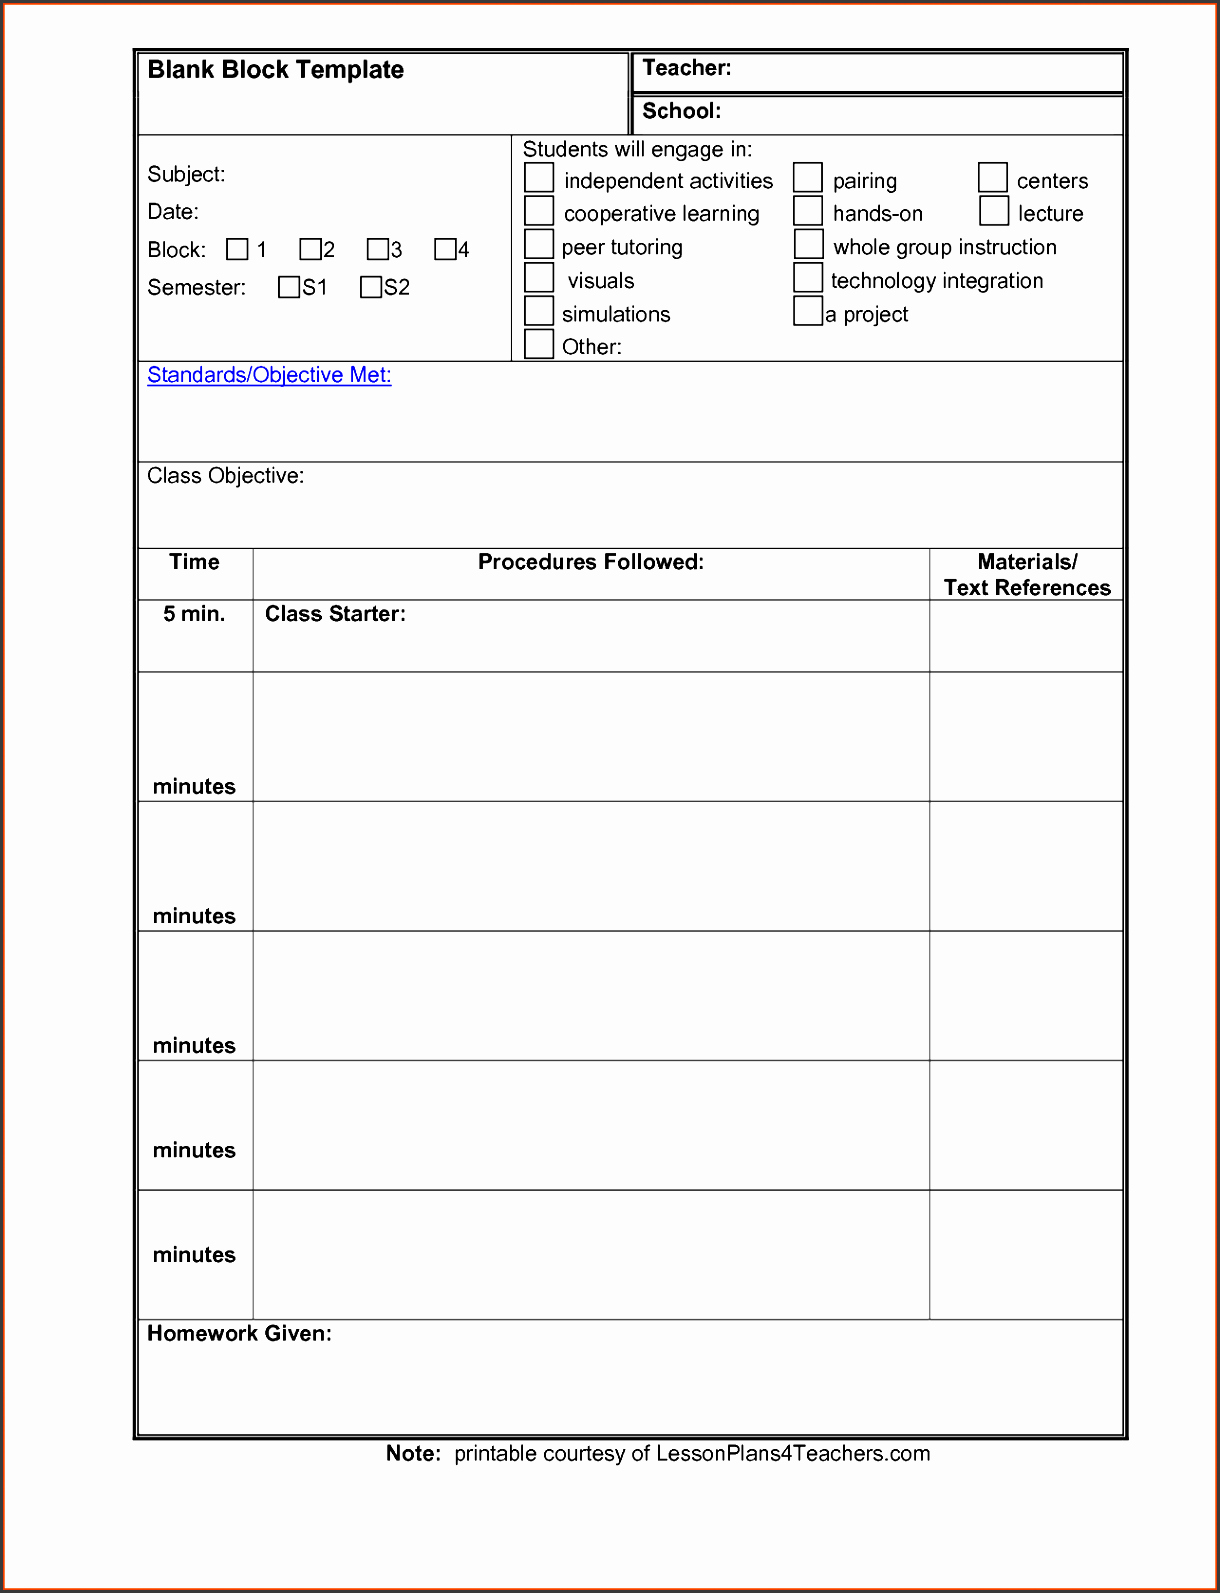 Weekly Lesson Plan Template Doc New 4 Daily Lesson Planner Template Sampletemplatess Sampletemplatess